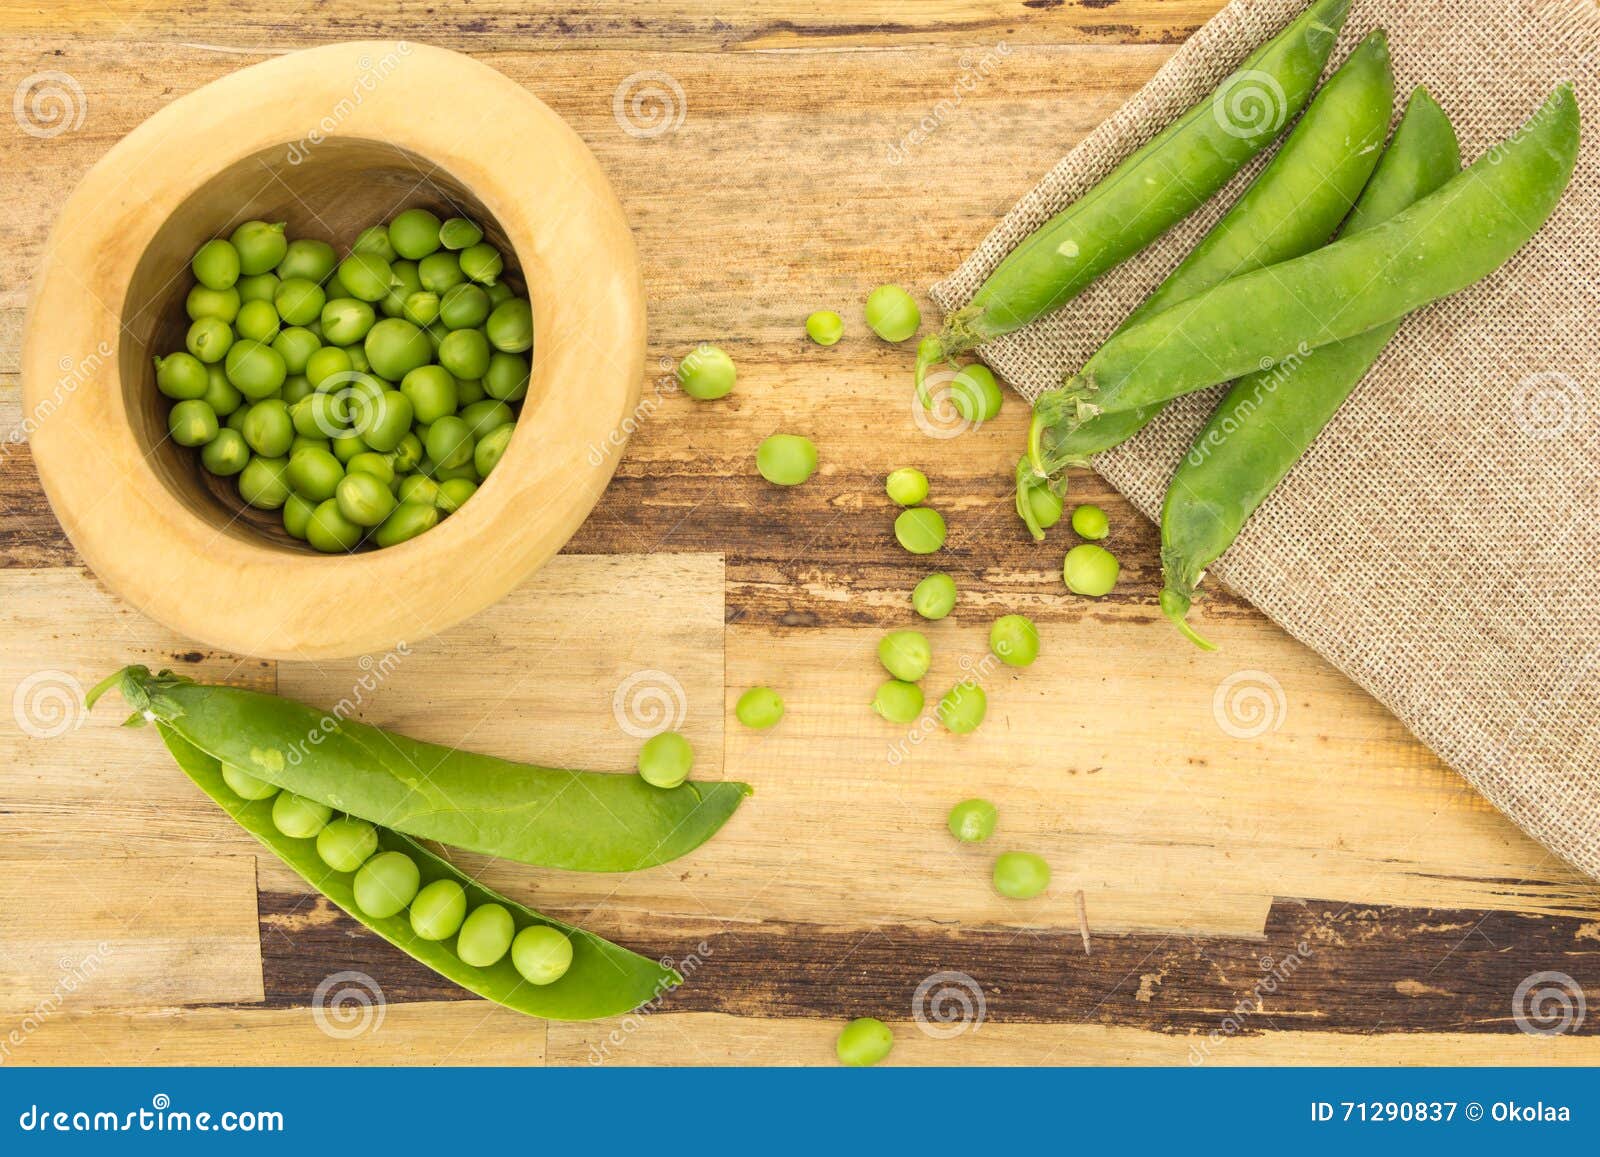 Fresh green peas in wooden bowl, on wooden surface and cloth